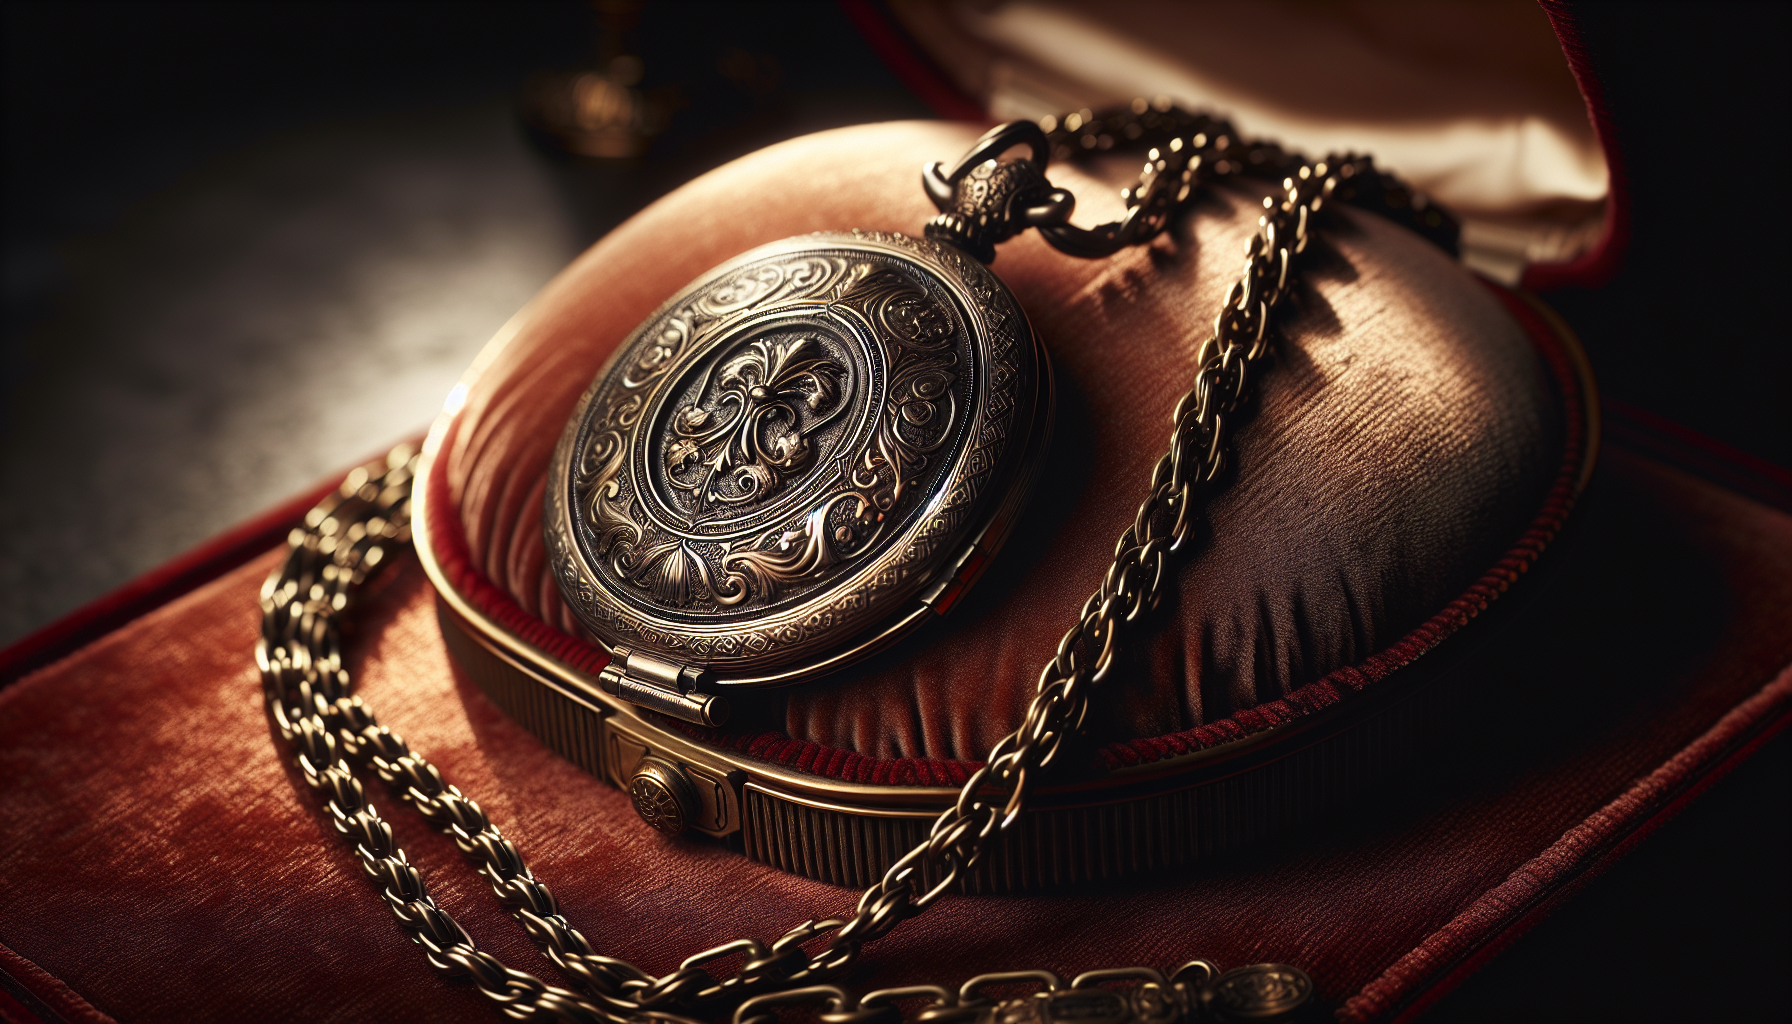 An image displaying the elegance and timeless charm of a locket necklace. The focal point of the image is a beautifully crafted antique locket with intricate details, perhaps bearing an age-old family